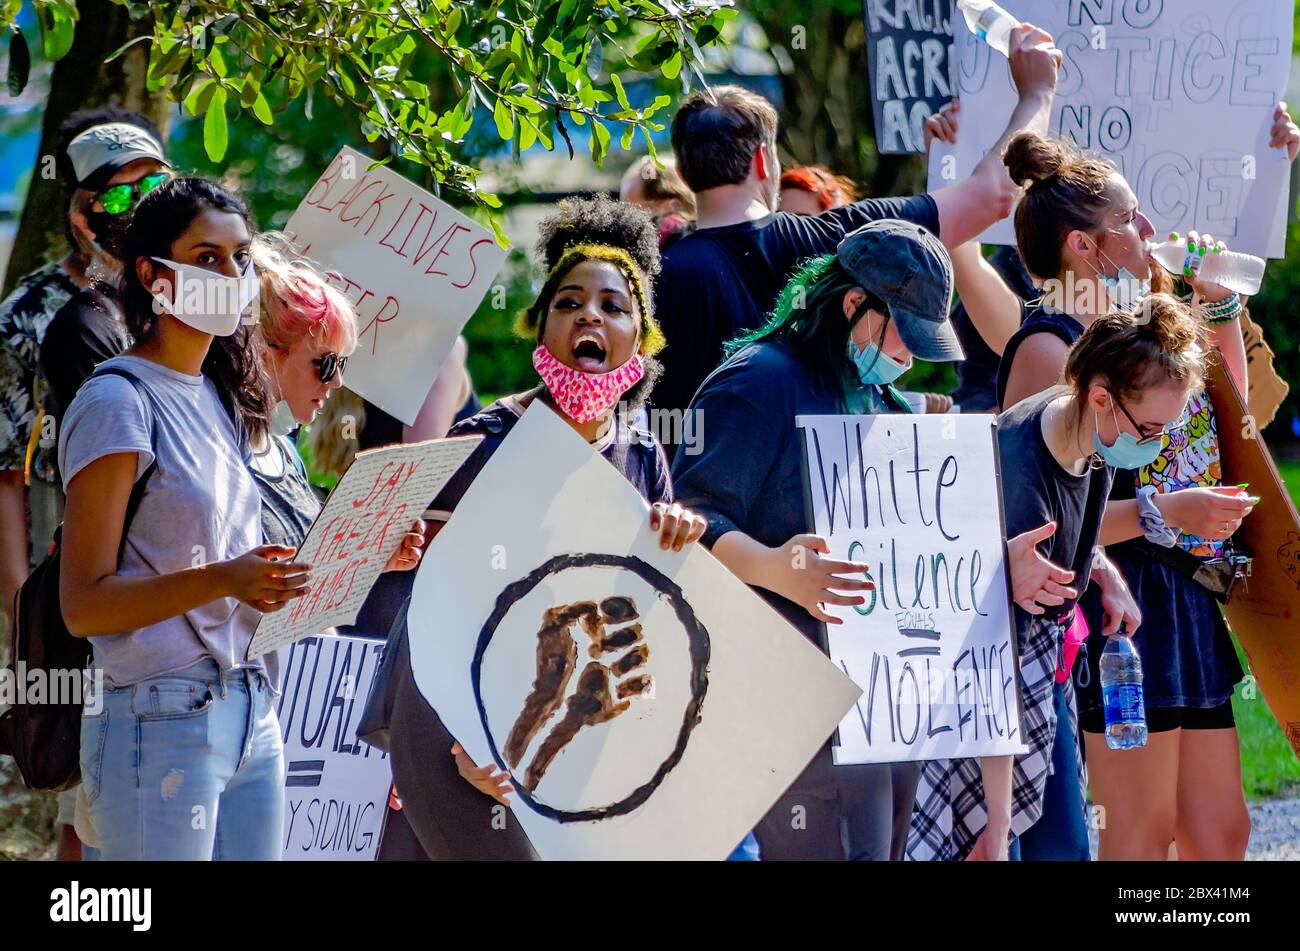 Protestors wave signs while at a protest against police brutality, June 4, 2020, at Memorial Park in Mobile, Alabama. Stock Photo